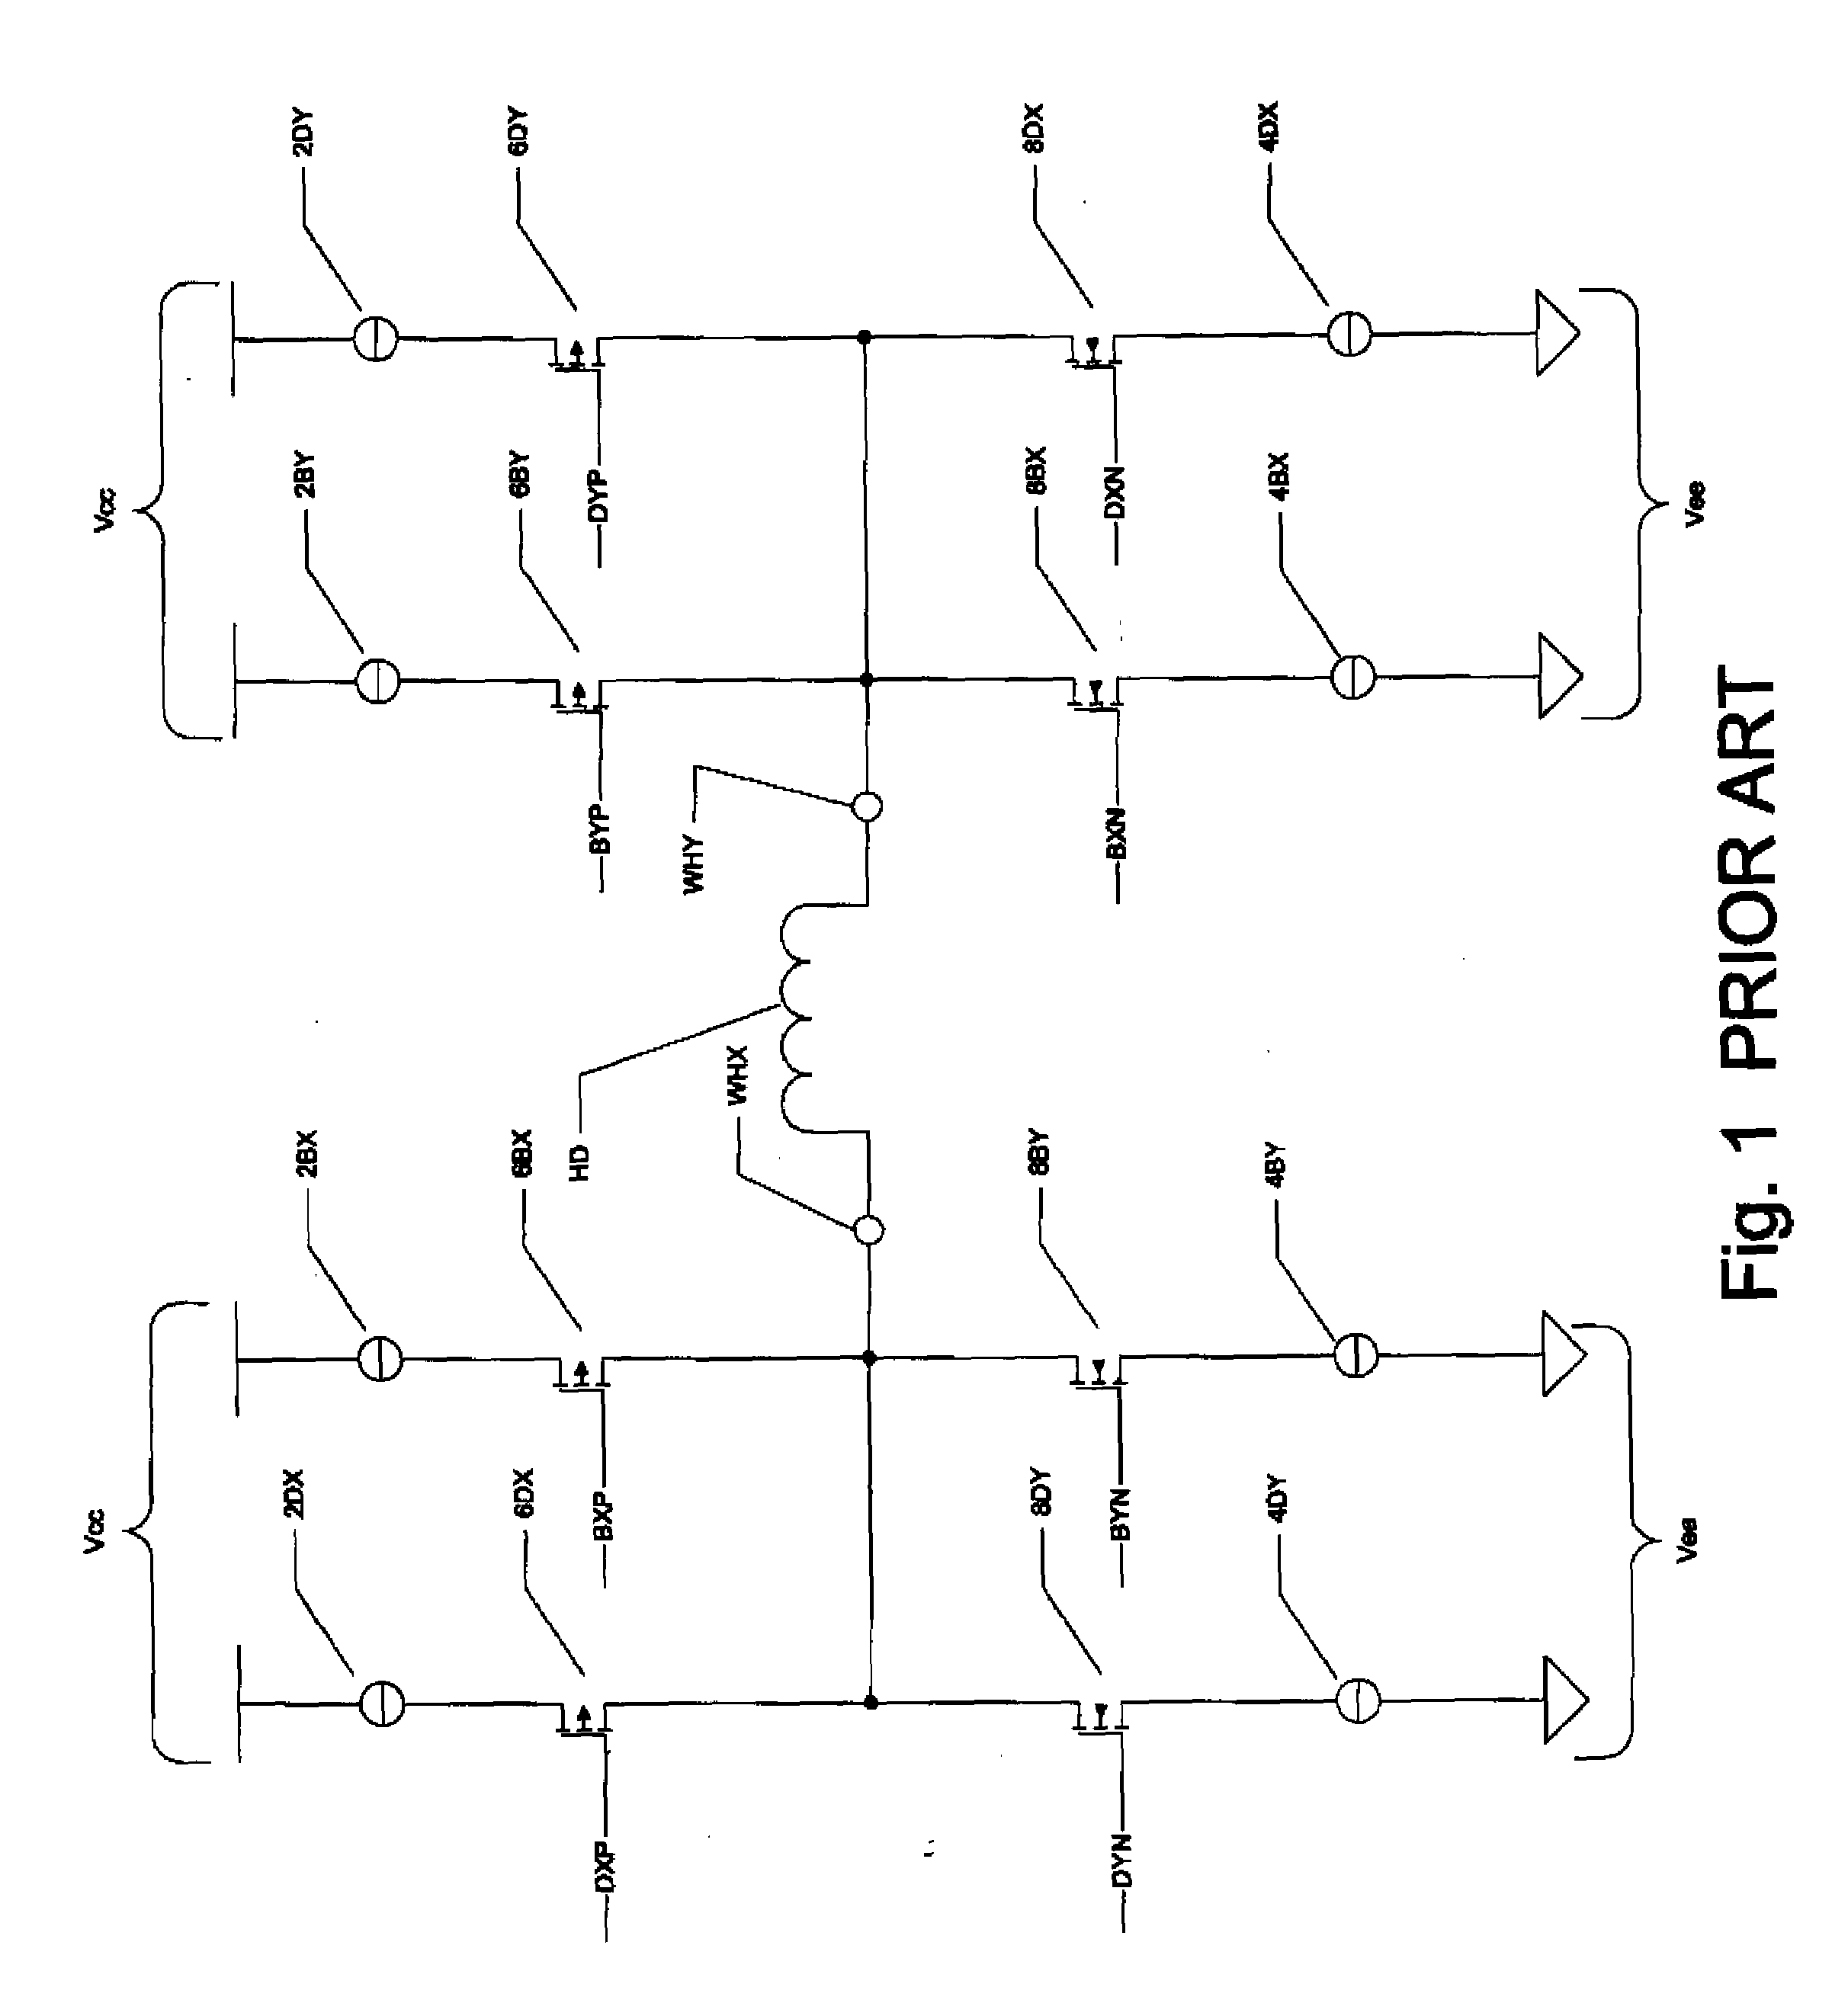 Low Power Write Driver for a Magnetic Disk Drive